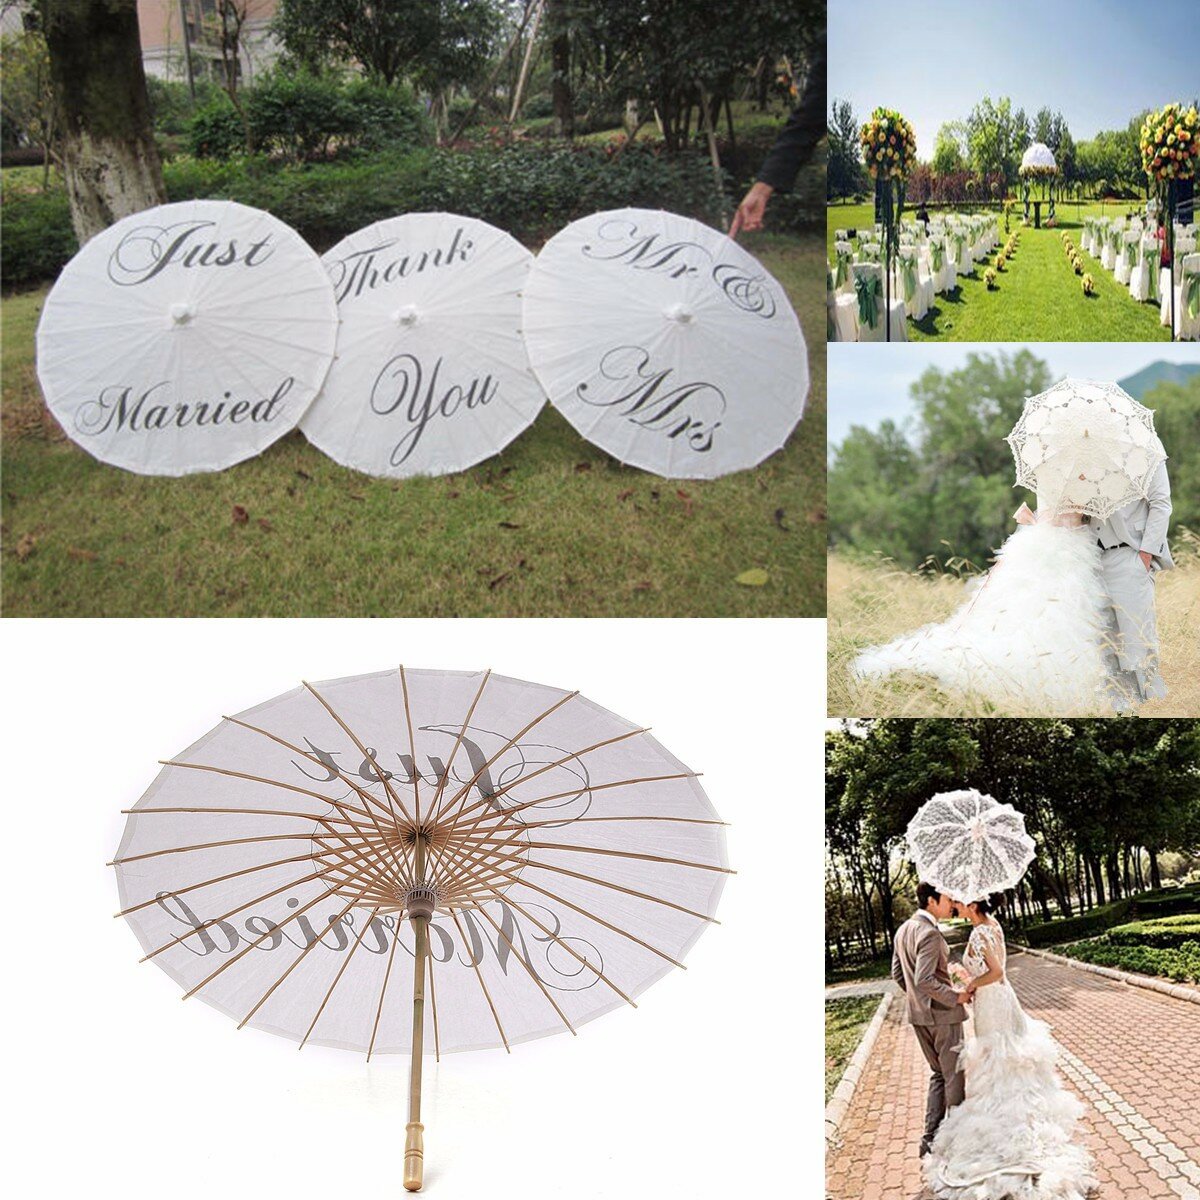 

Bamboo White Paper Parasol Umbrella Just Married Mr